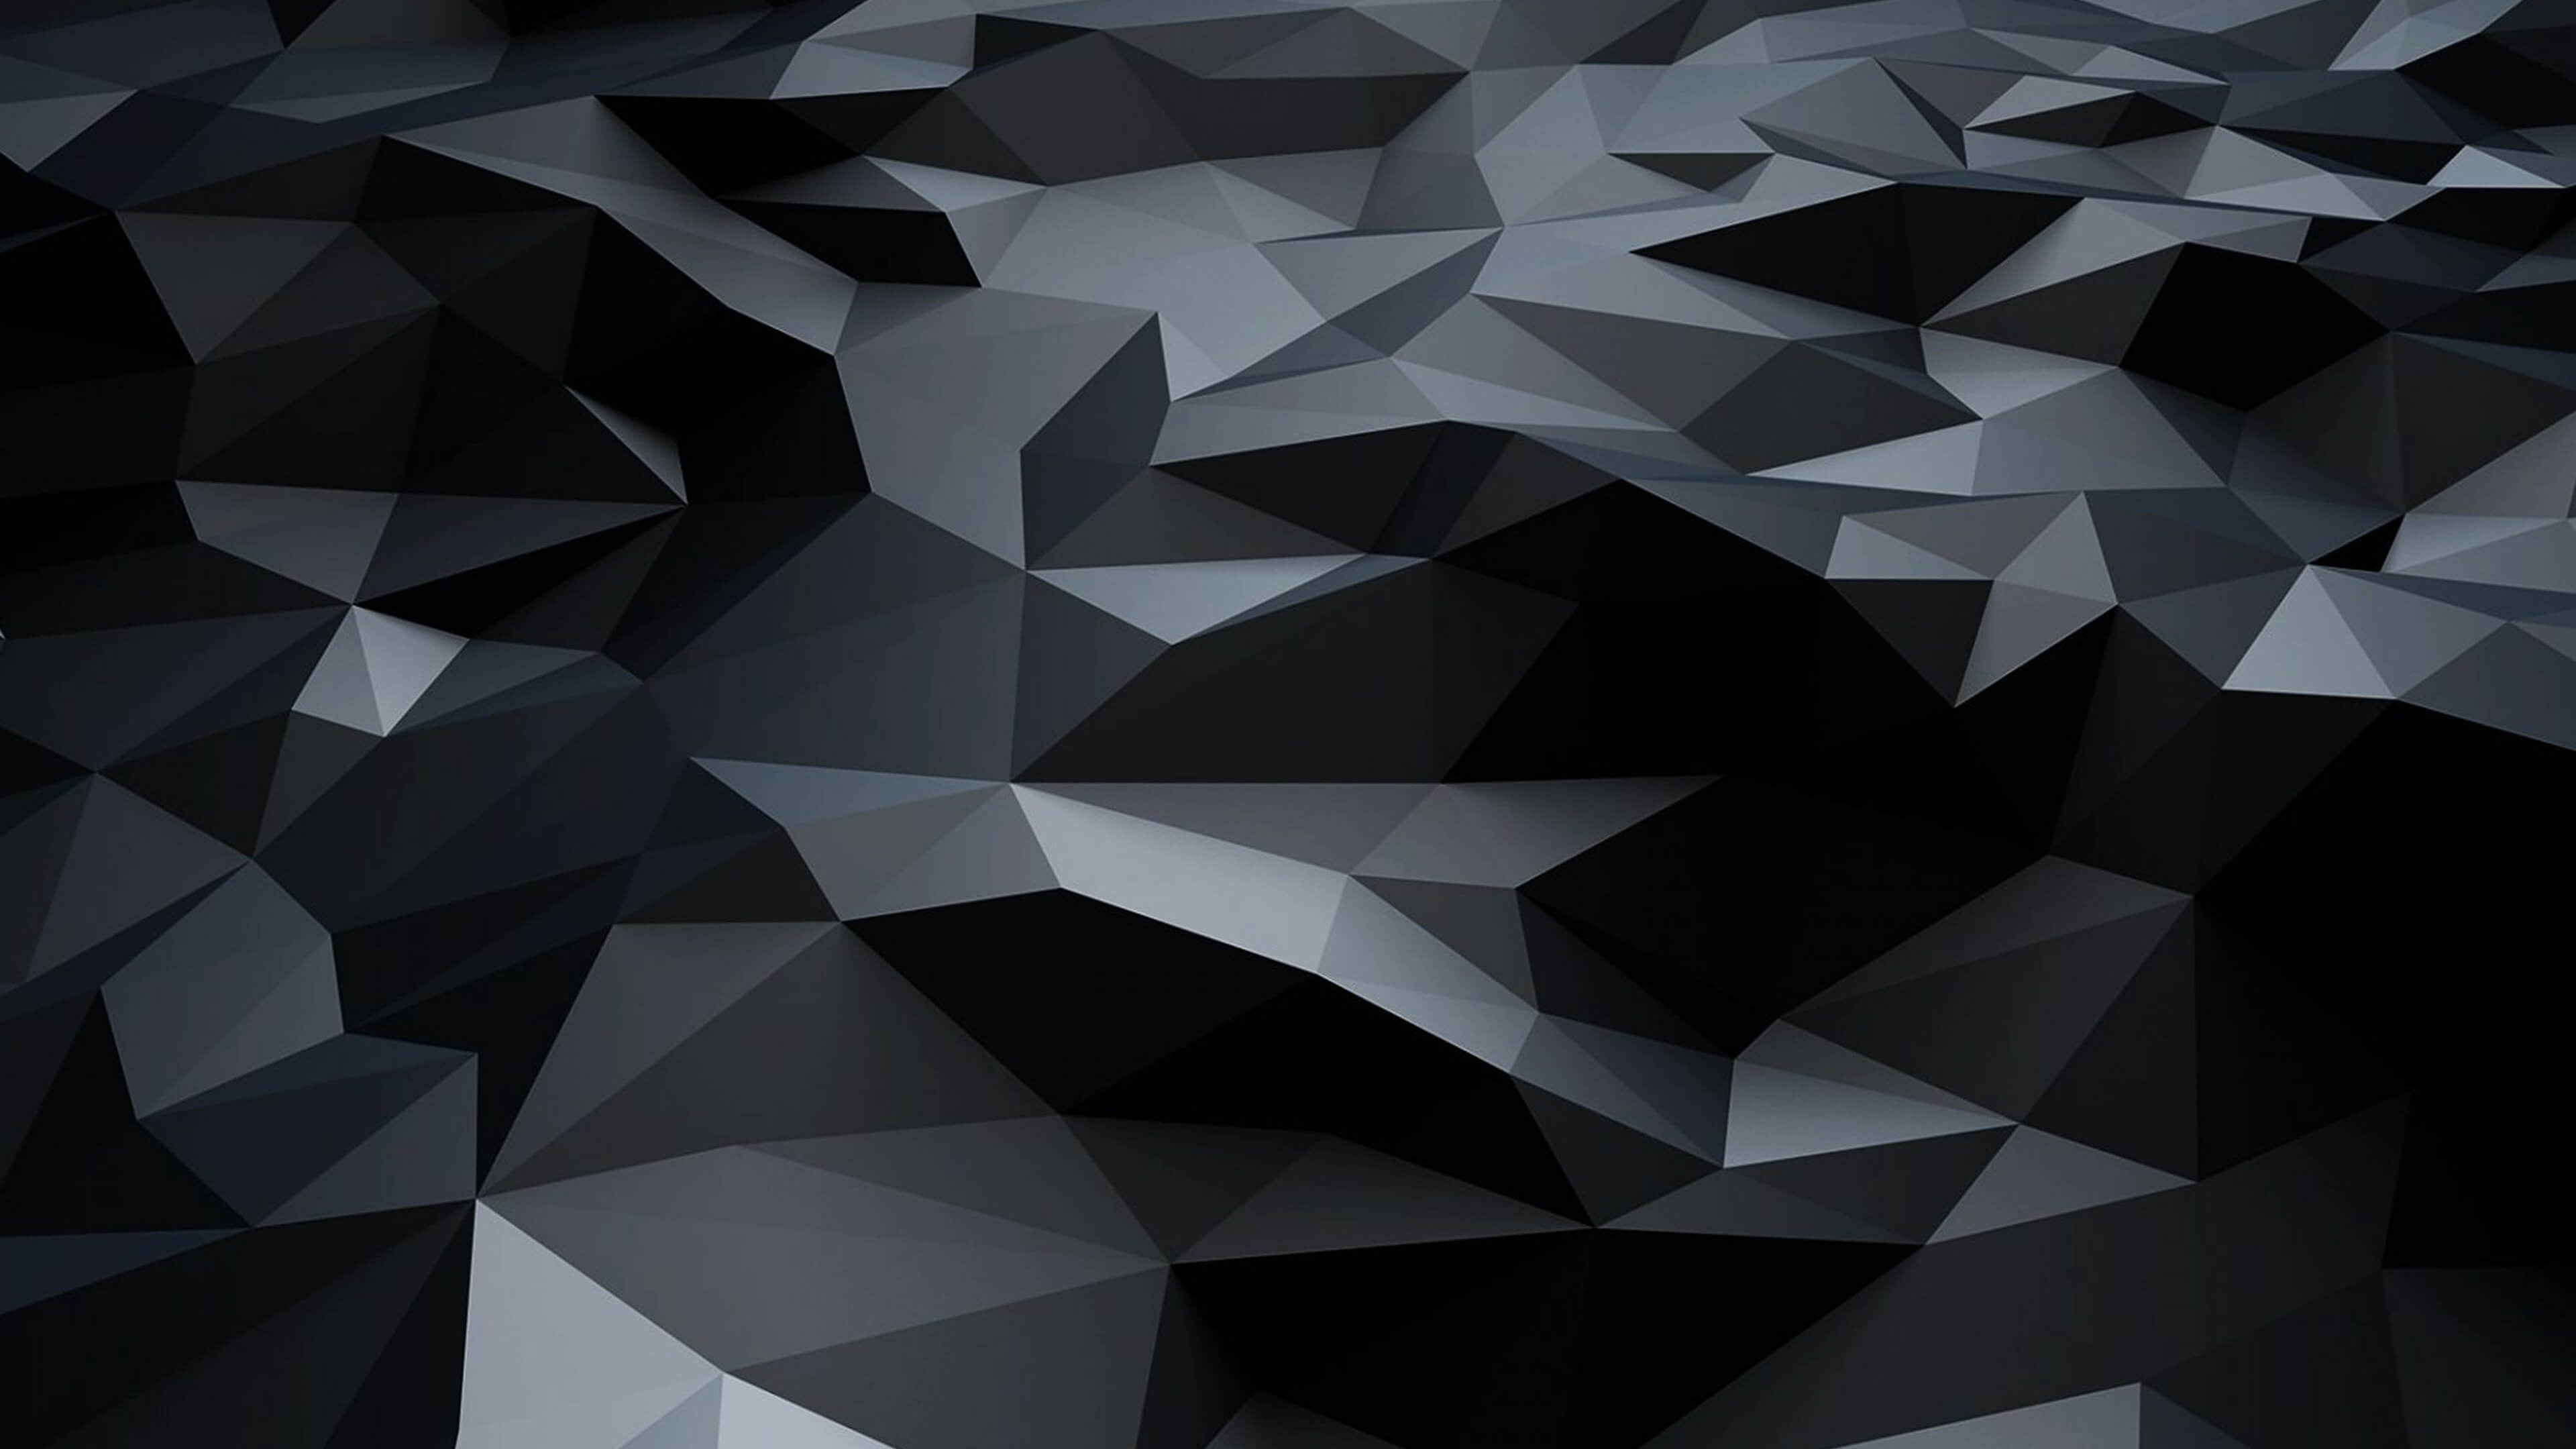 Black and White Abstract Art. Wallpaper in 3840x2160 Resolution